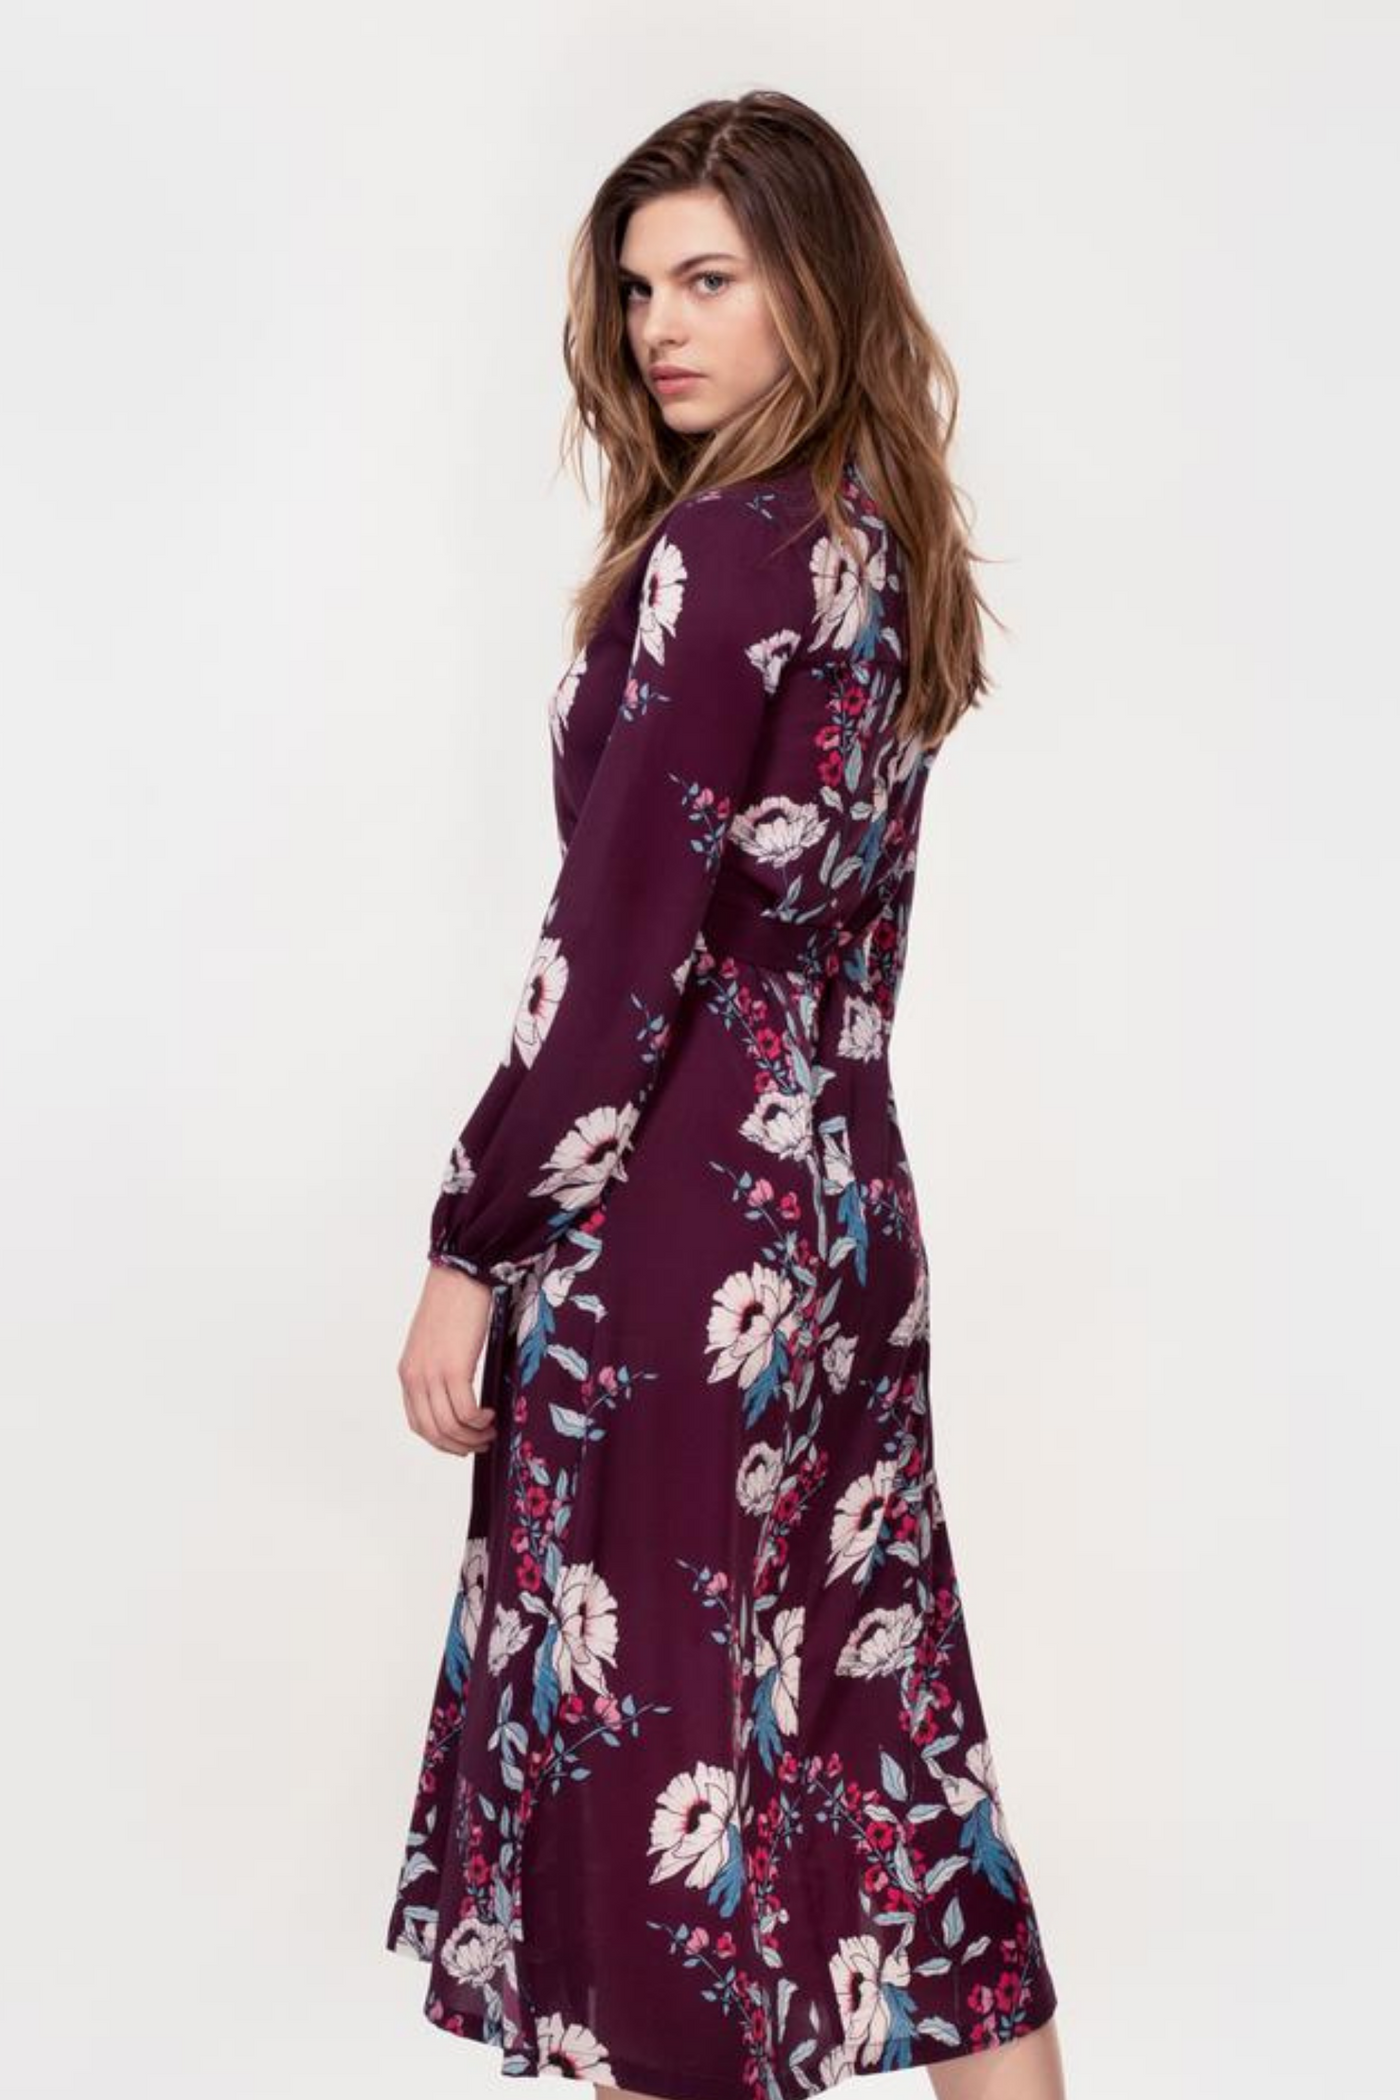 Hide the Label Acacia Shirt Dress in Plum Peony Print, available on ZERRIN with free Singapore shipping.